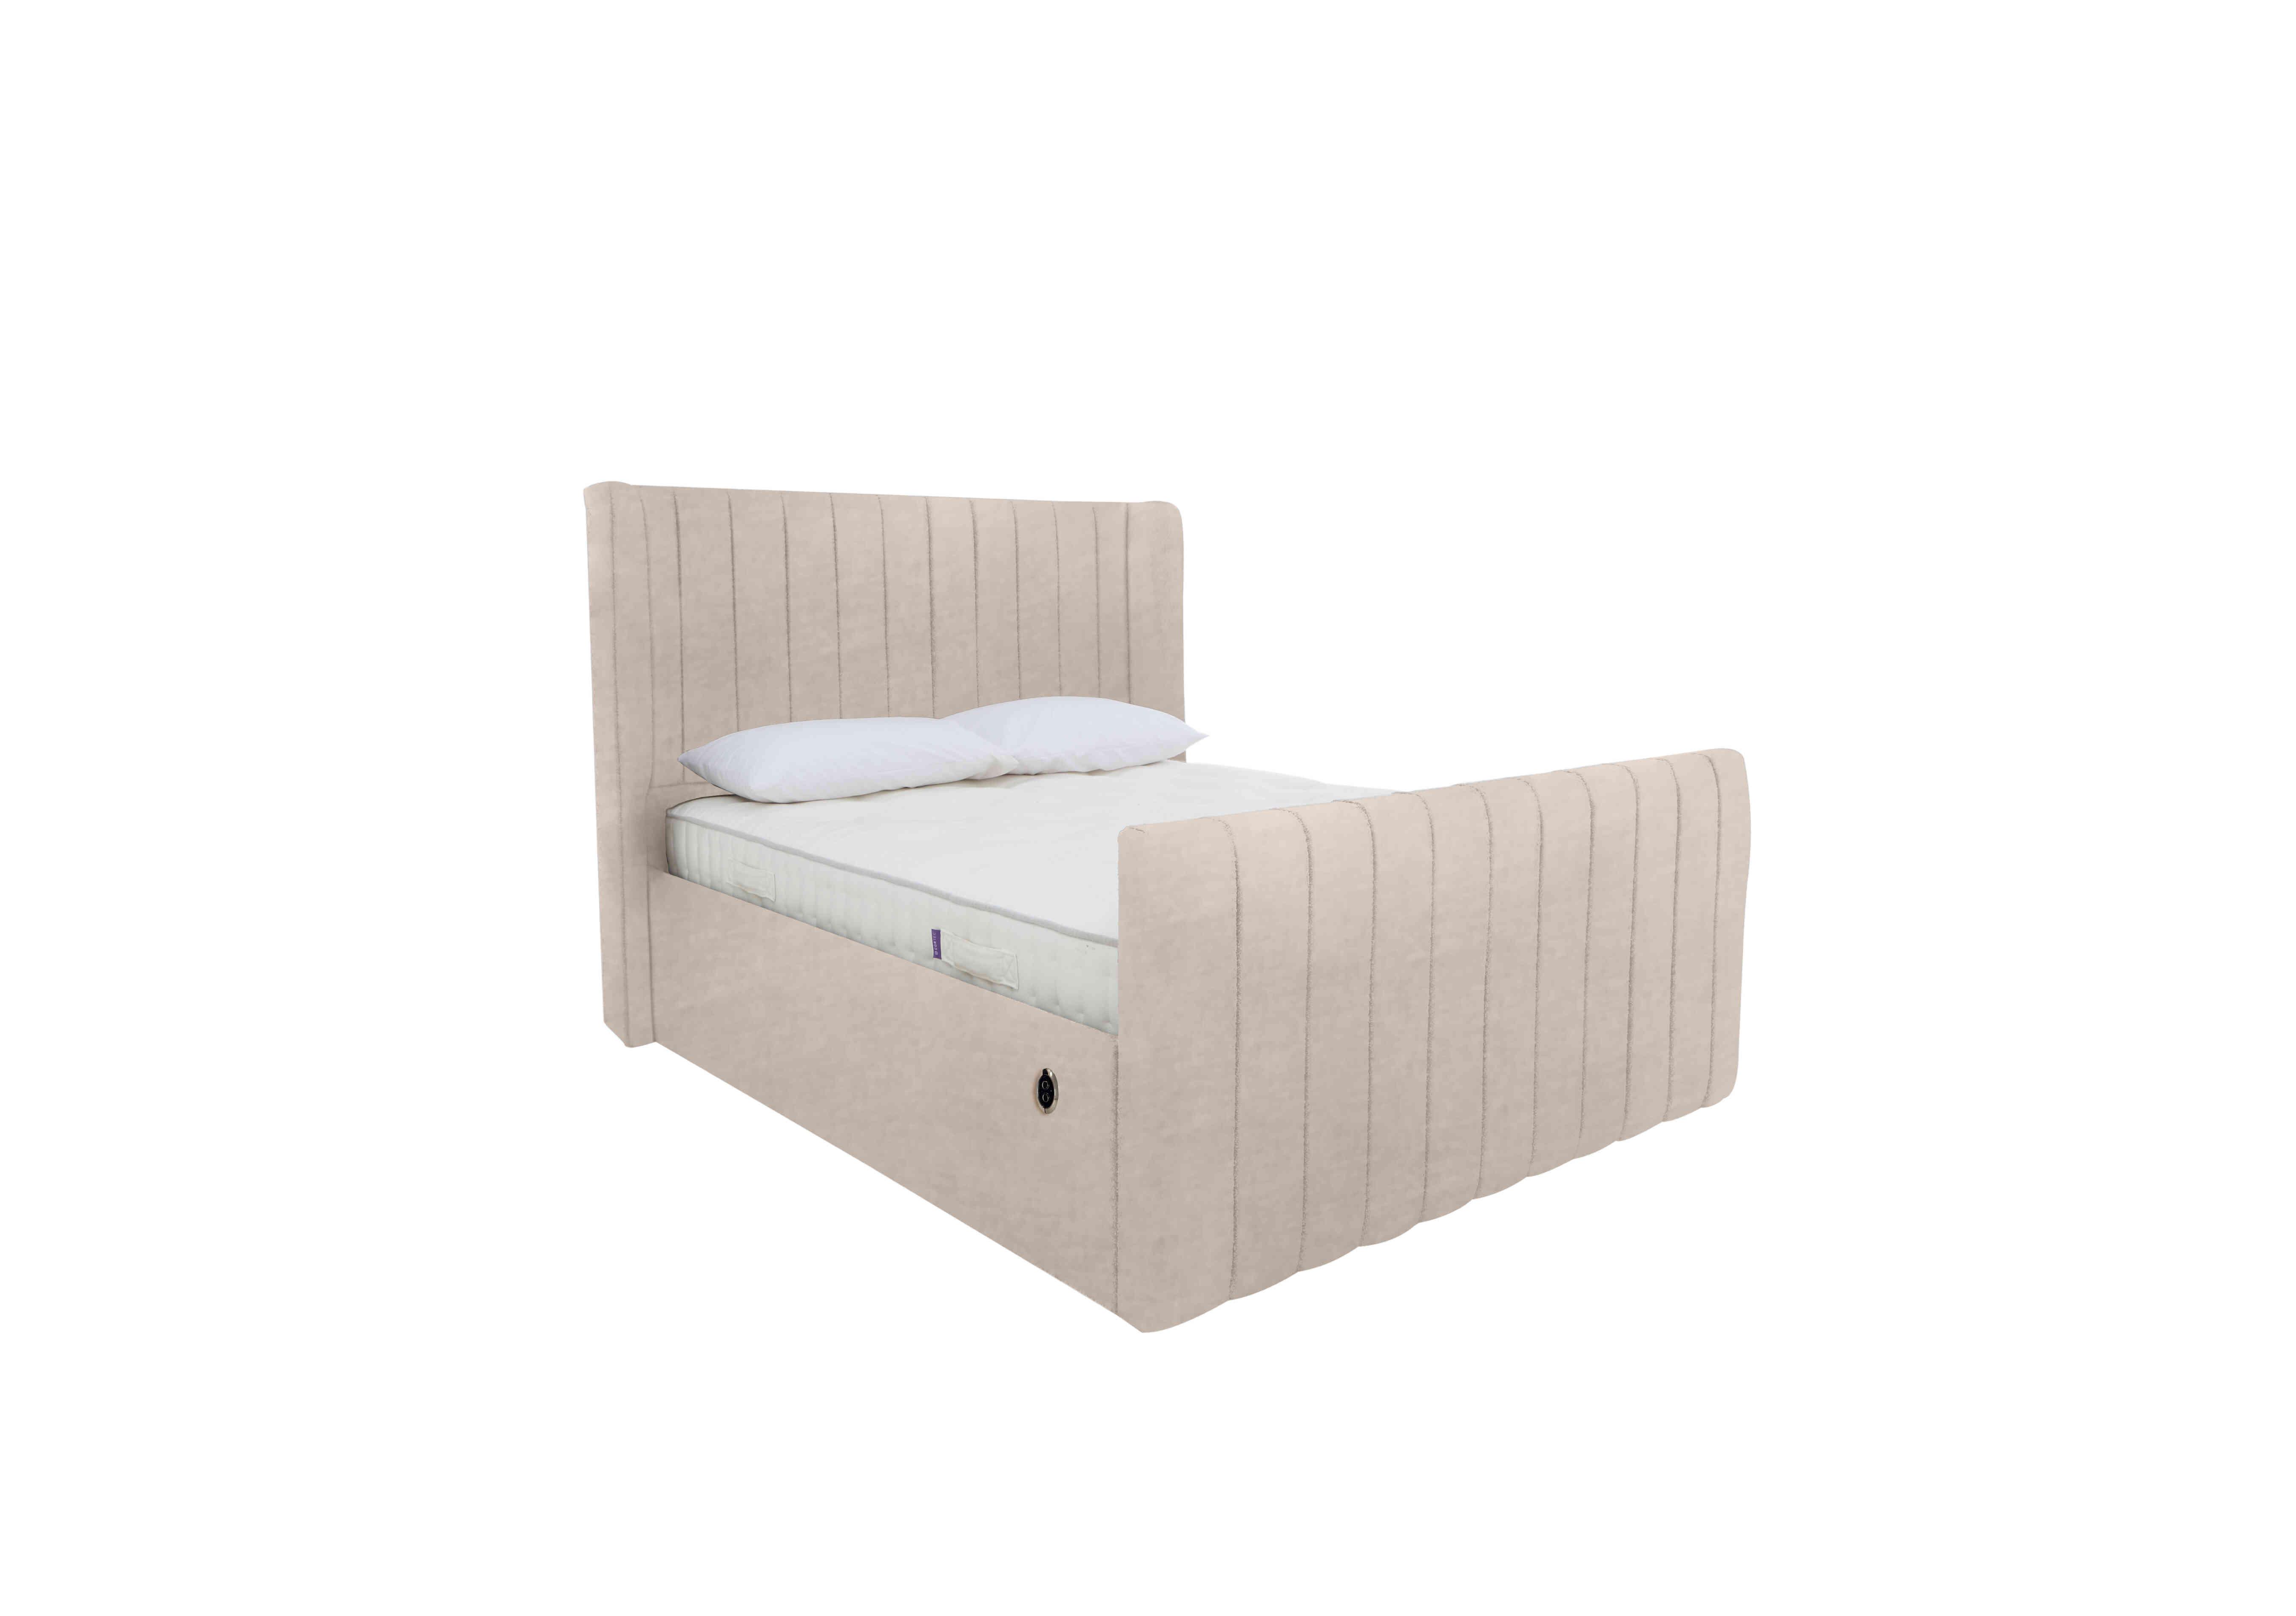 Eira High Foot End Electric Ottoman Bed Frame in Savannah Almond on Furniture Village